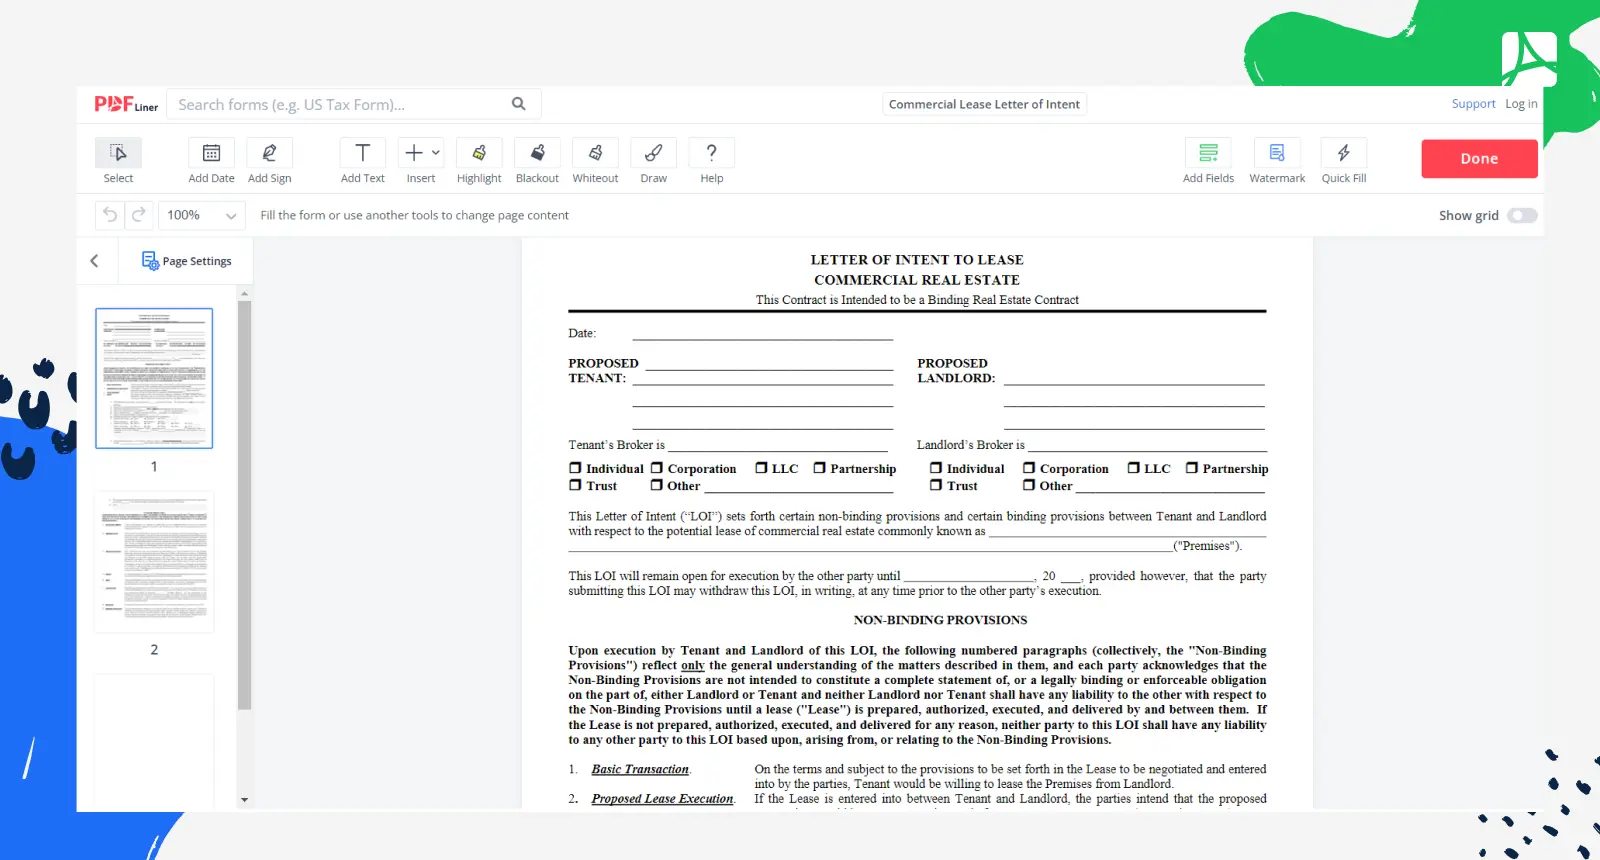 Commercial Lease Letter of Intent Form Screenshot